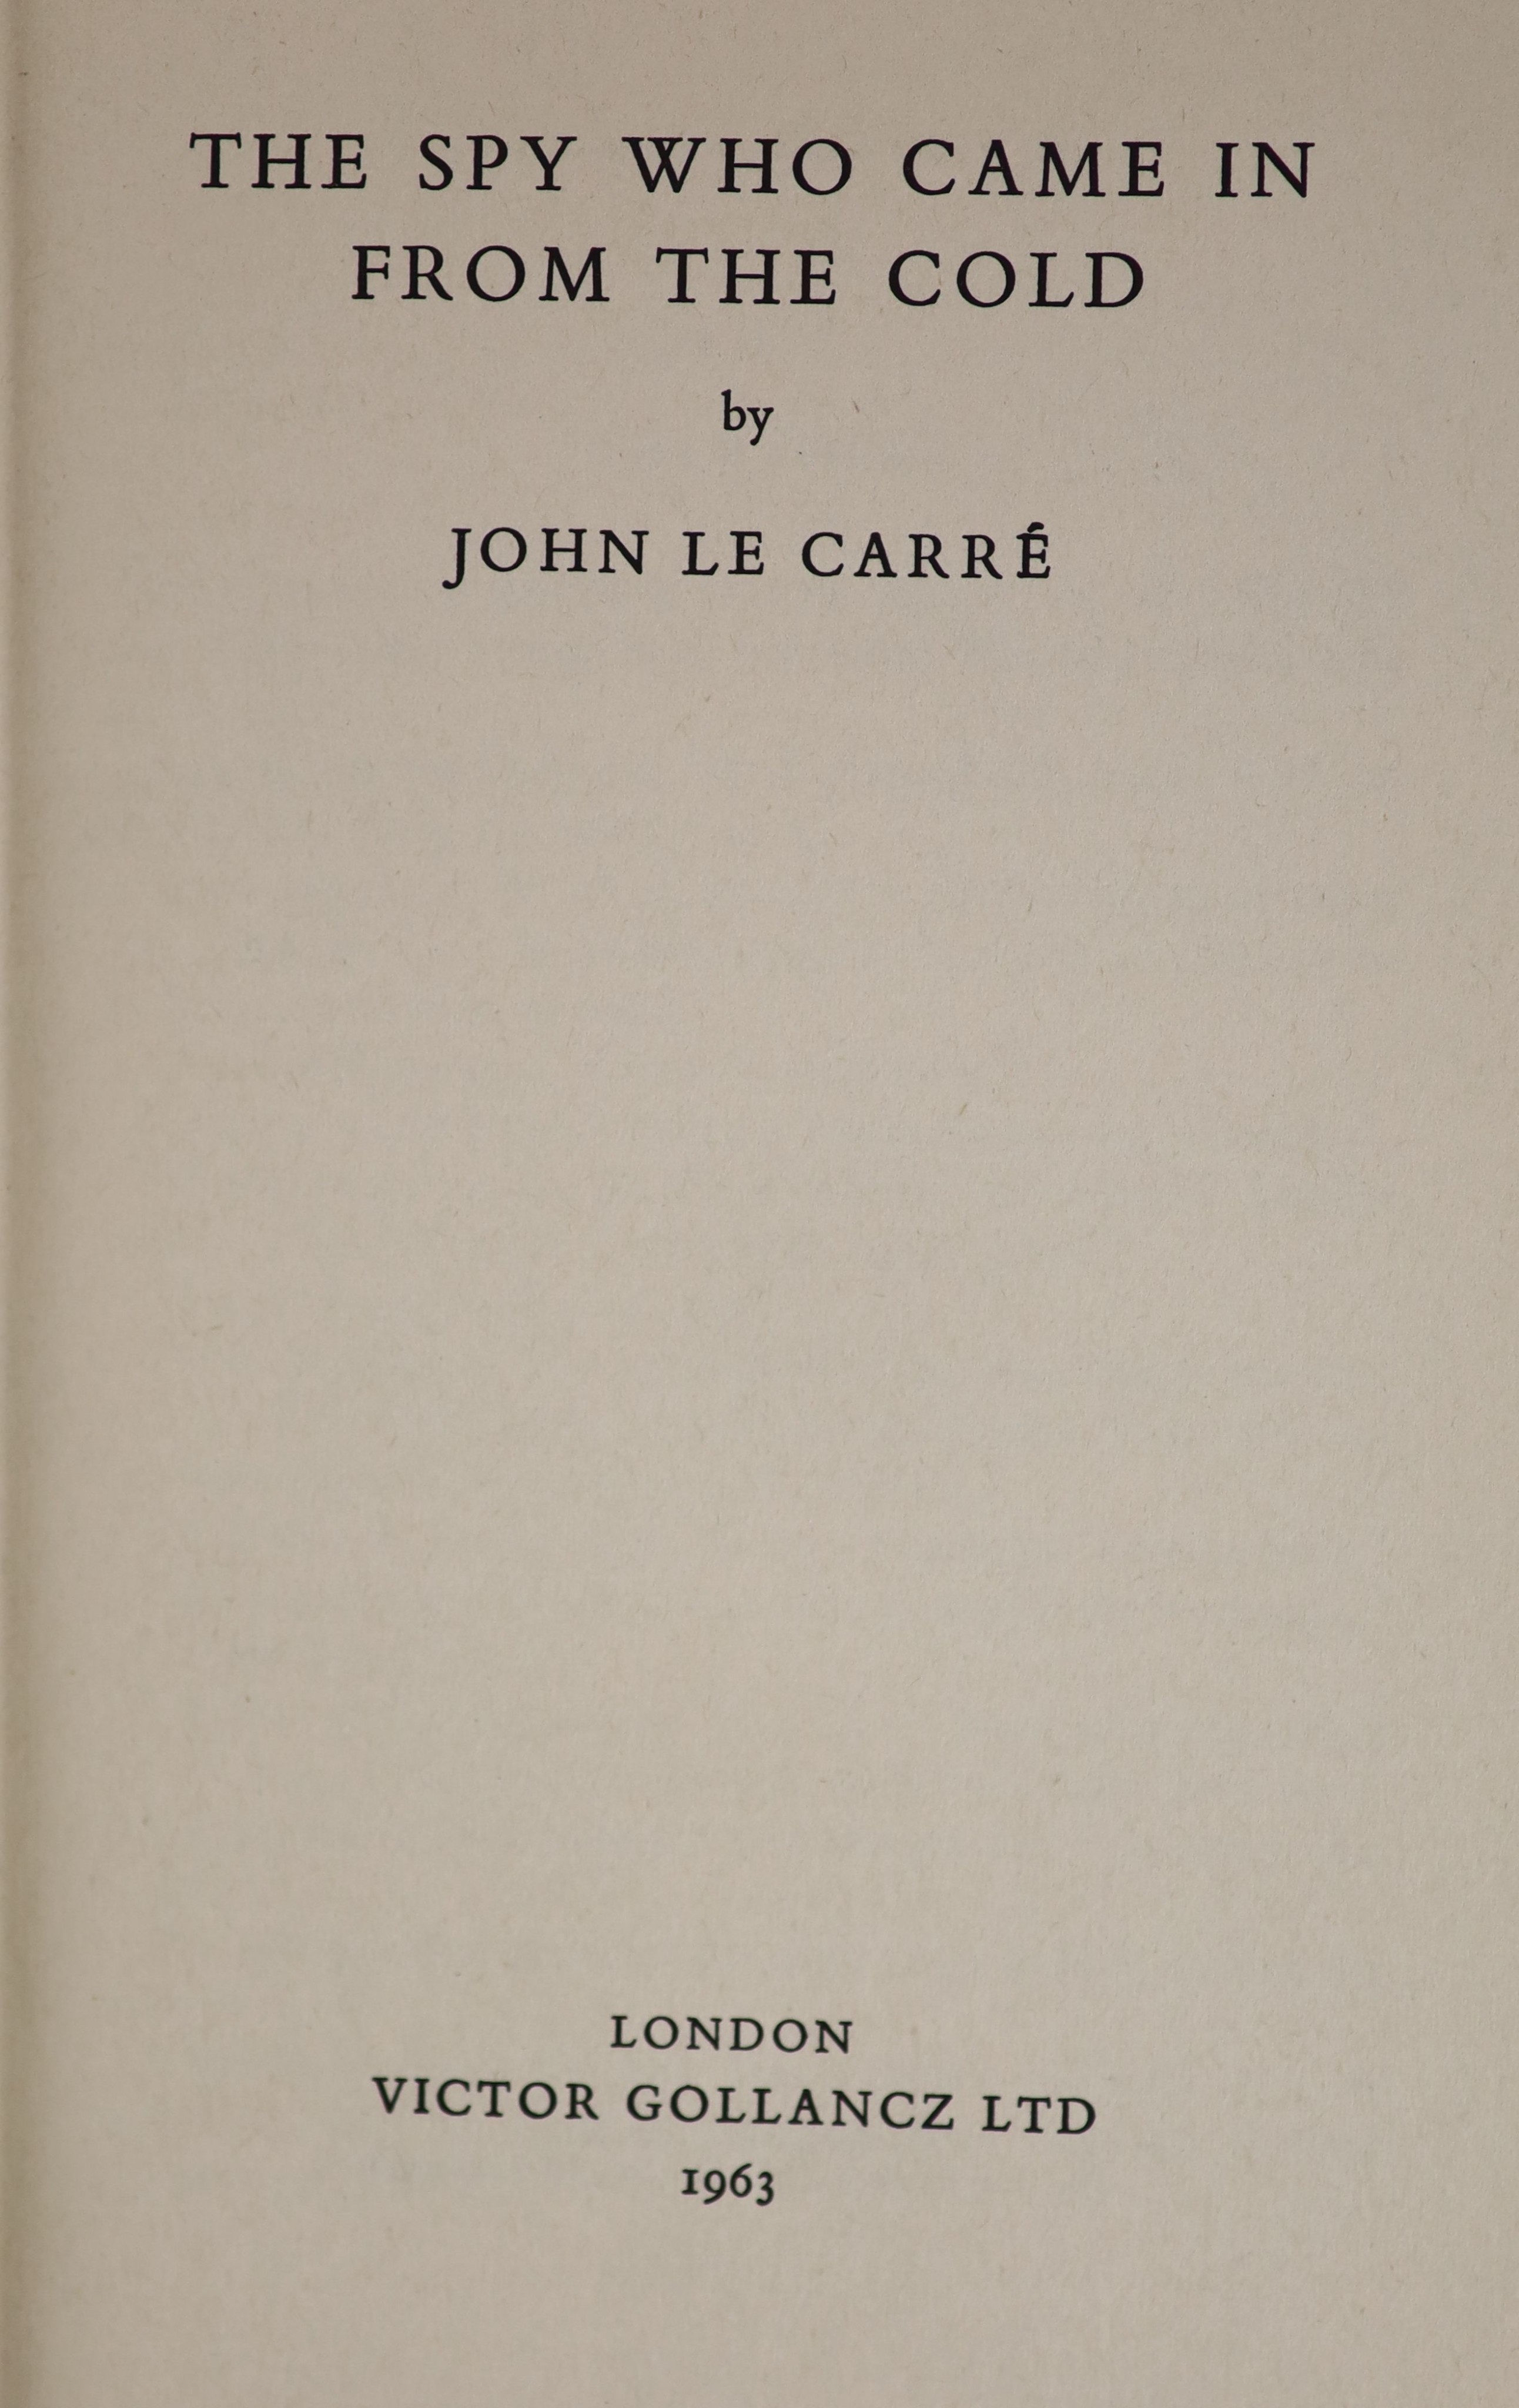 Le Carre, John - The Spy Who Came in From the Cold, 1st edition, with d/j, London, 1963